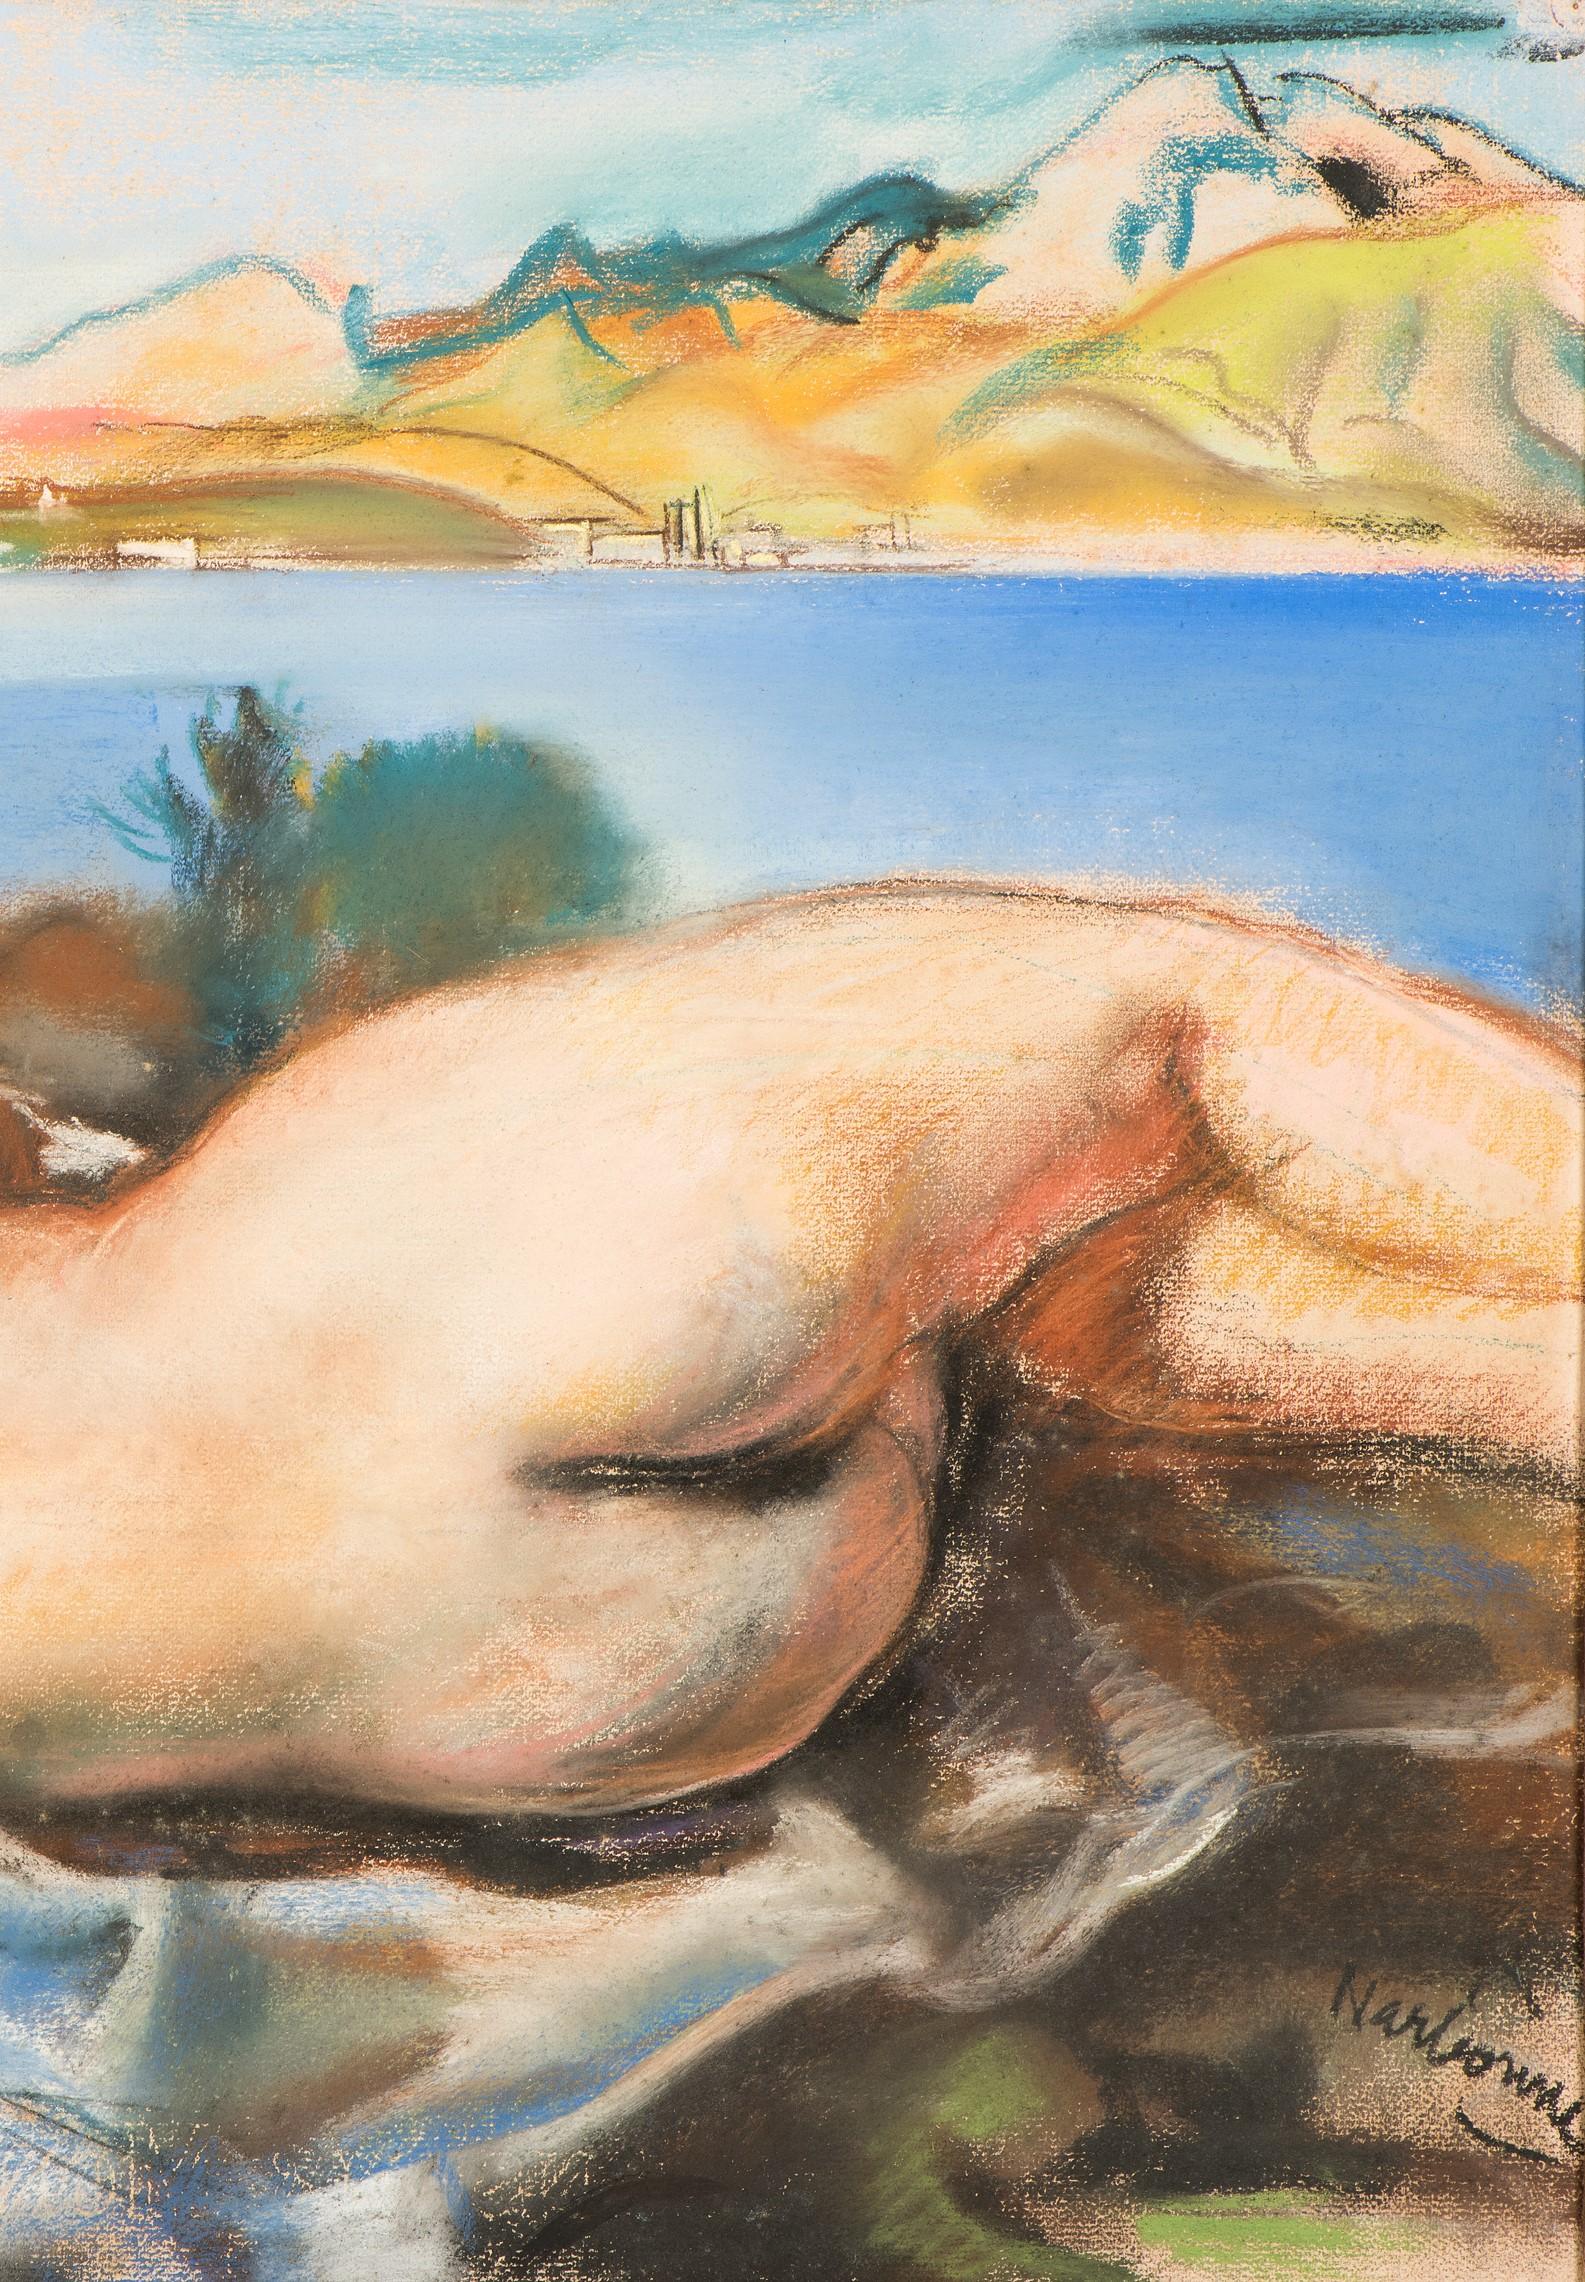 Nude in a landscape - Painting by Eugene Narbonne